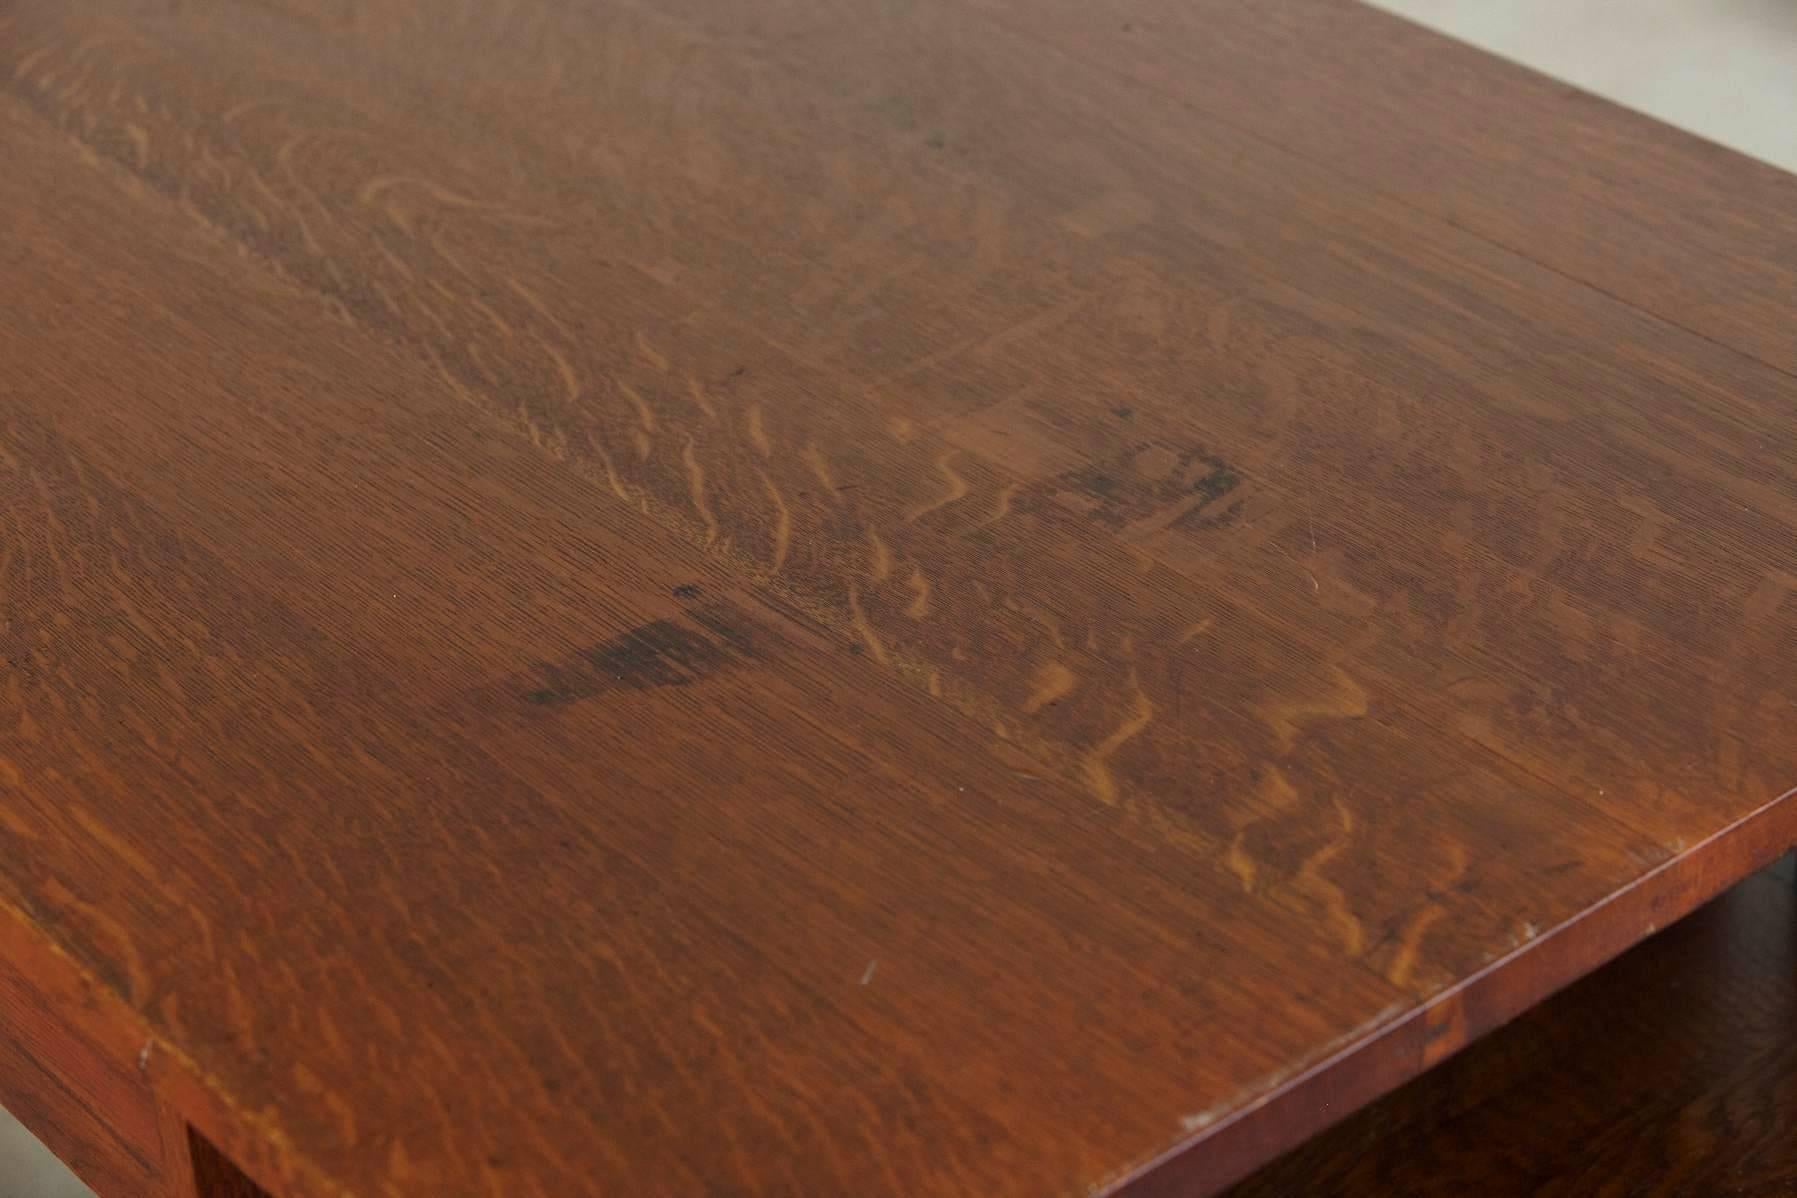 20th Century Arts & Crafts Mission Style Oak Library Table 2 from the Estate of José Ferrer